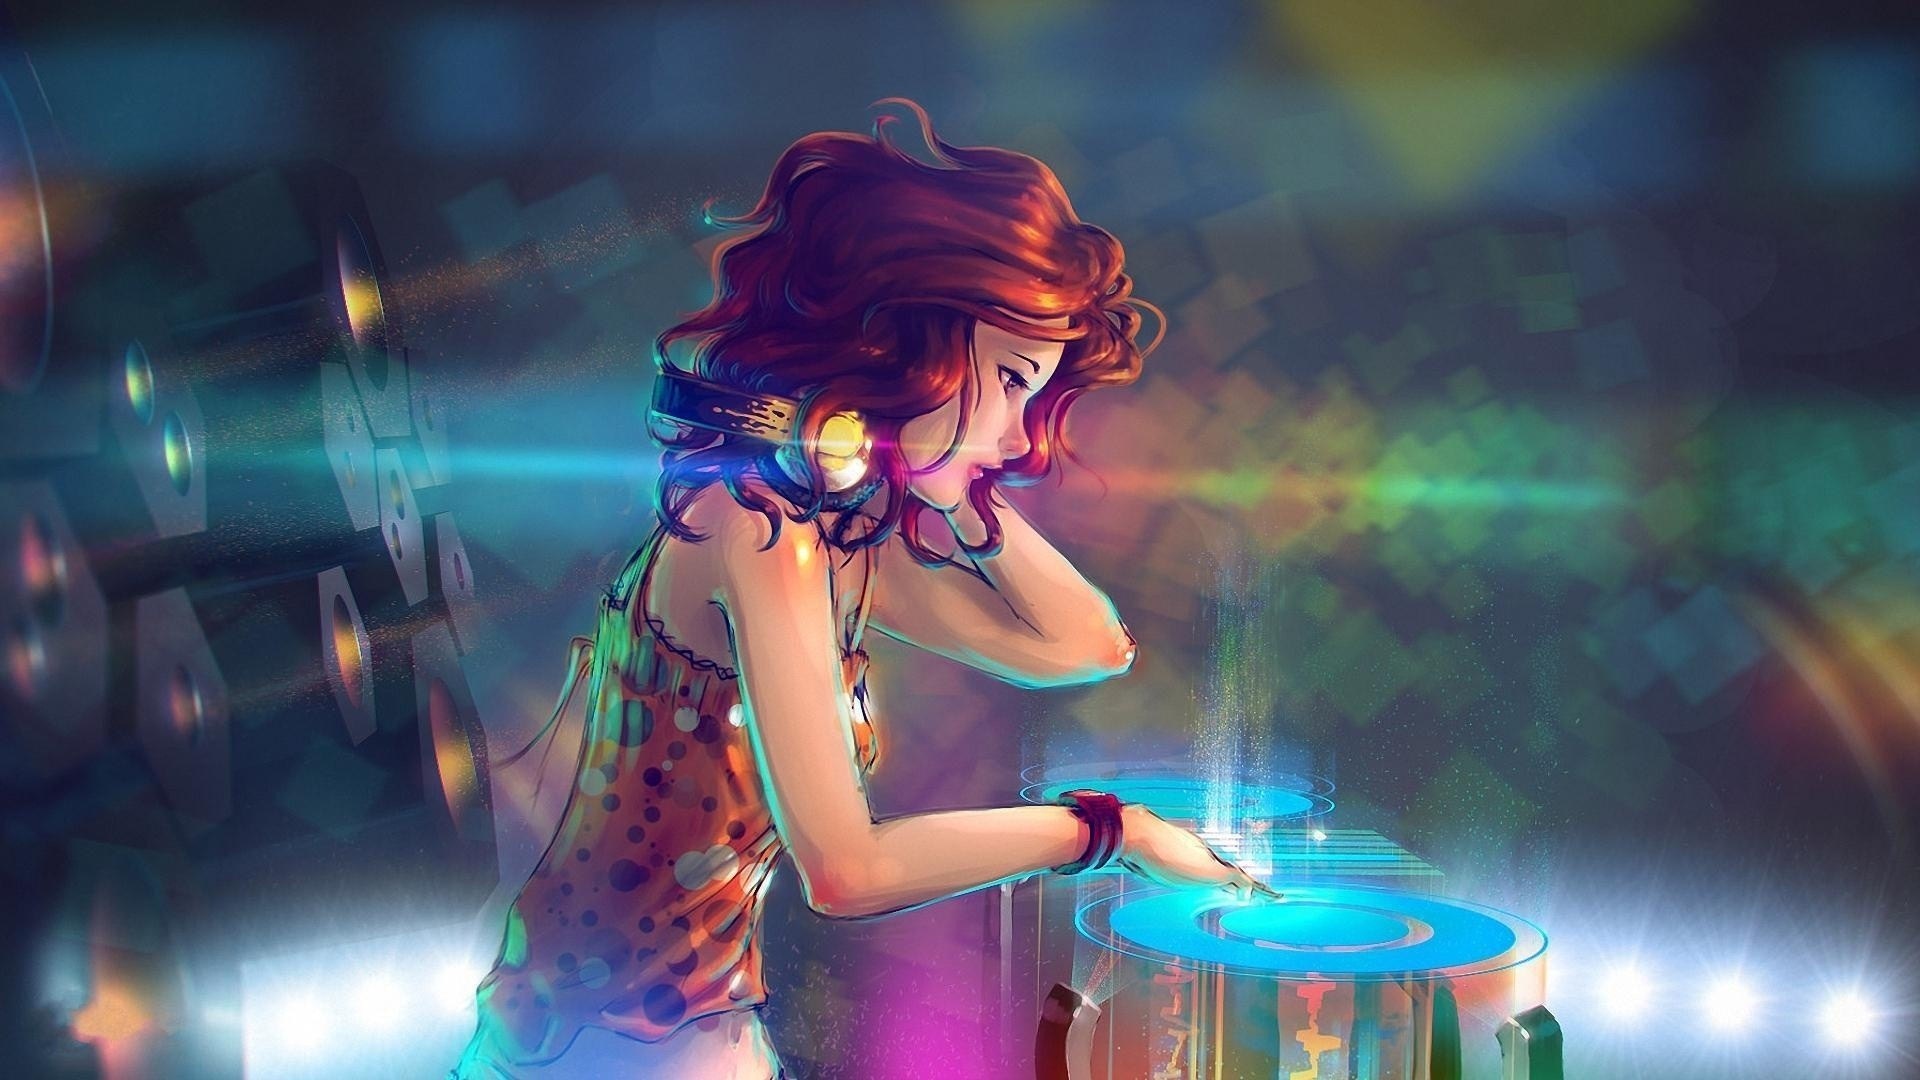 Anime Girl Headphones Mixing In The Club Music Wallpaper